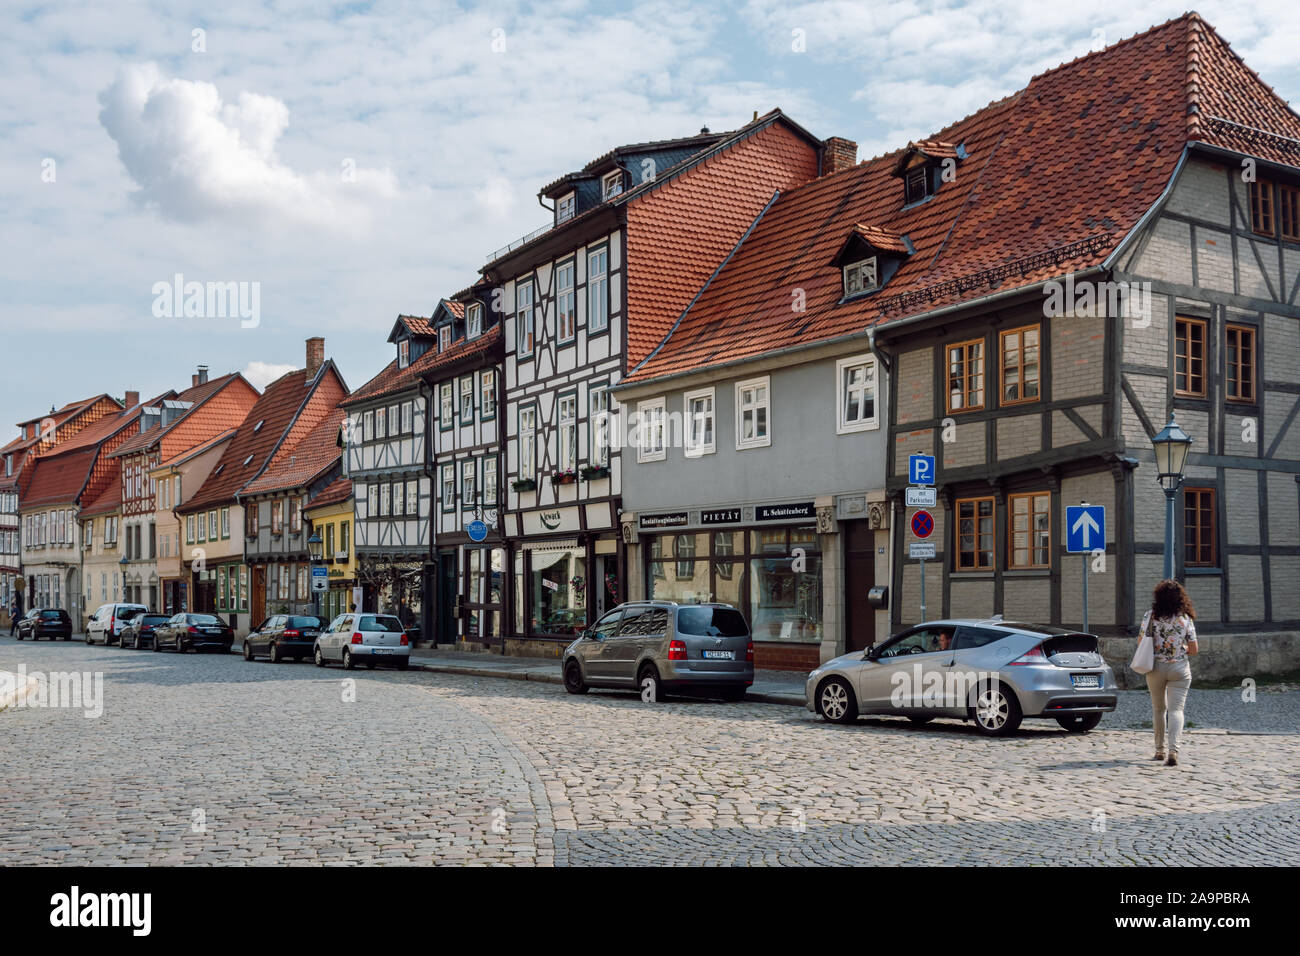 View of a paved street and beautiful colorful half-timbered houses of the old town Quedlinburg. Stock Photo